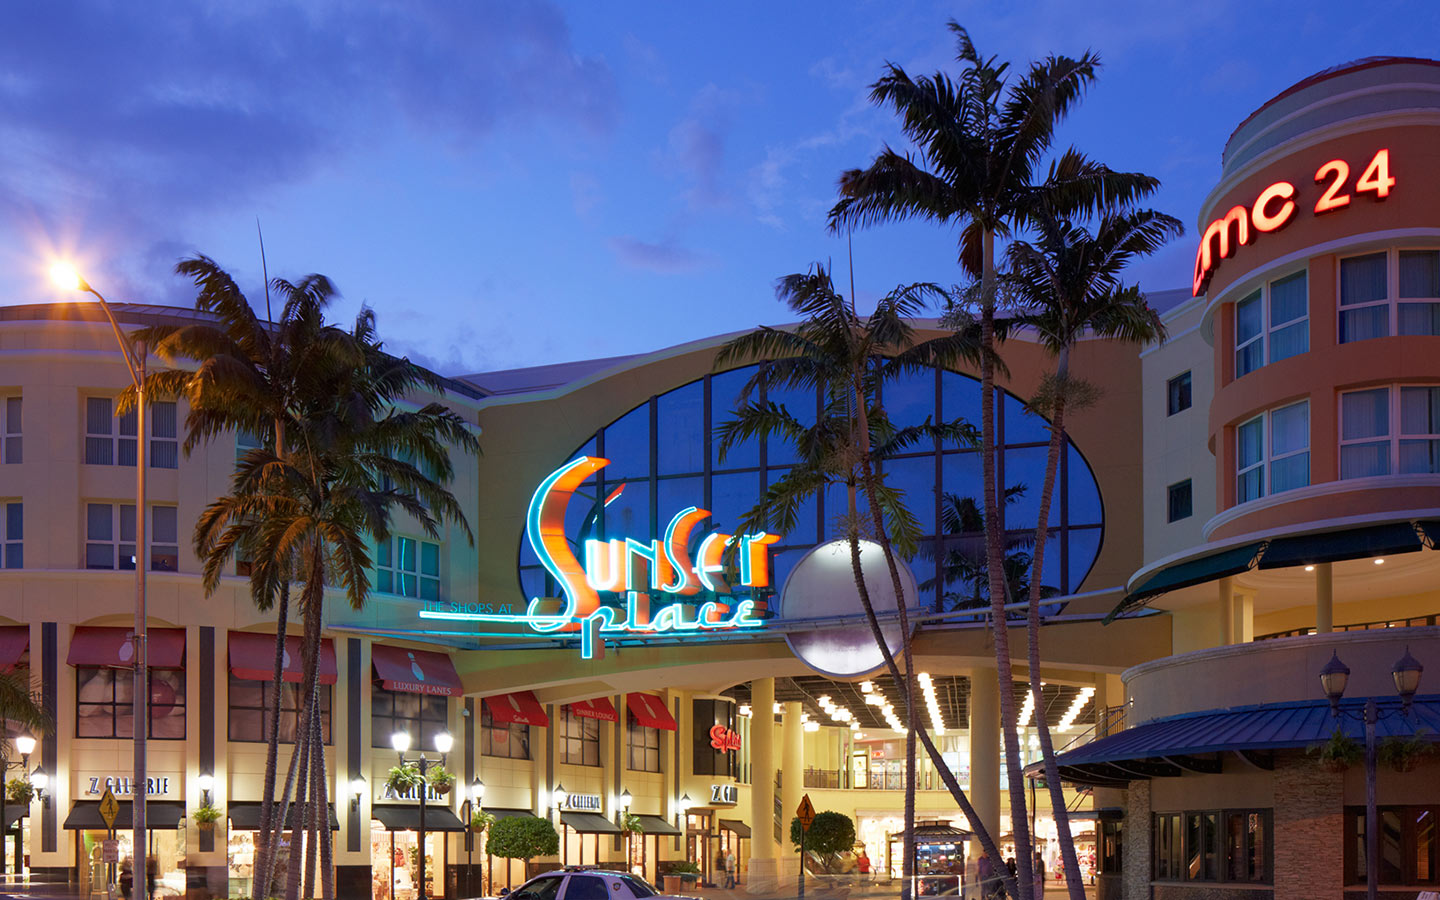 Sunset Place in South Miami